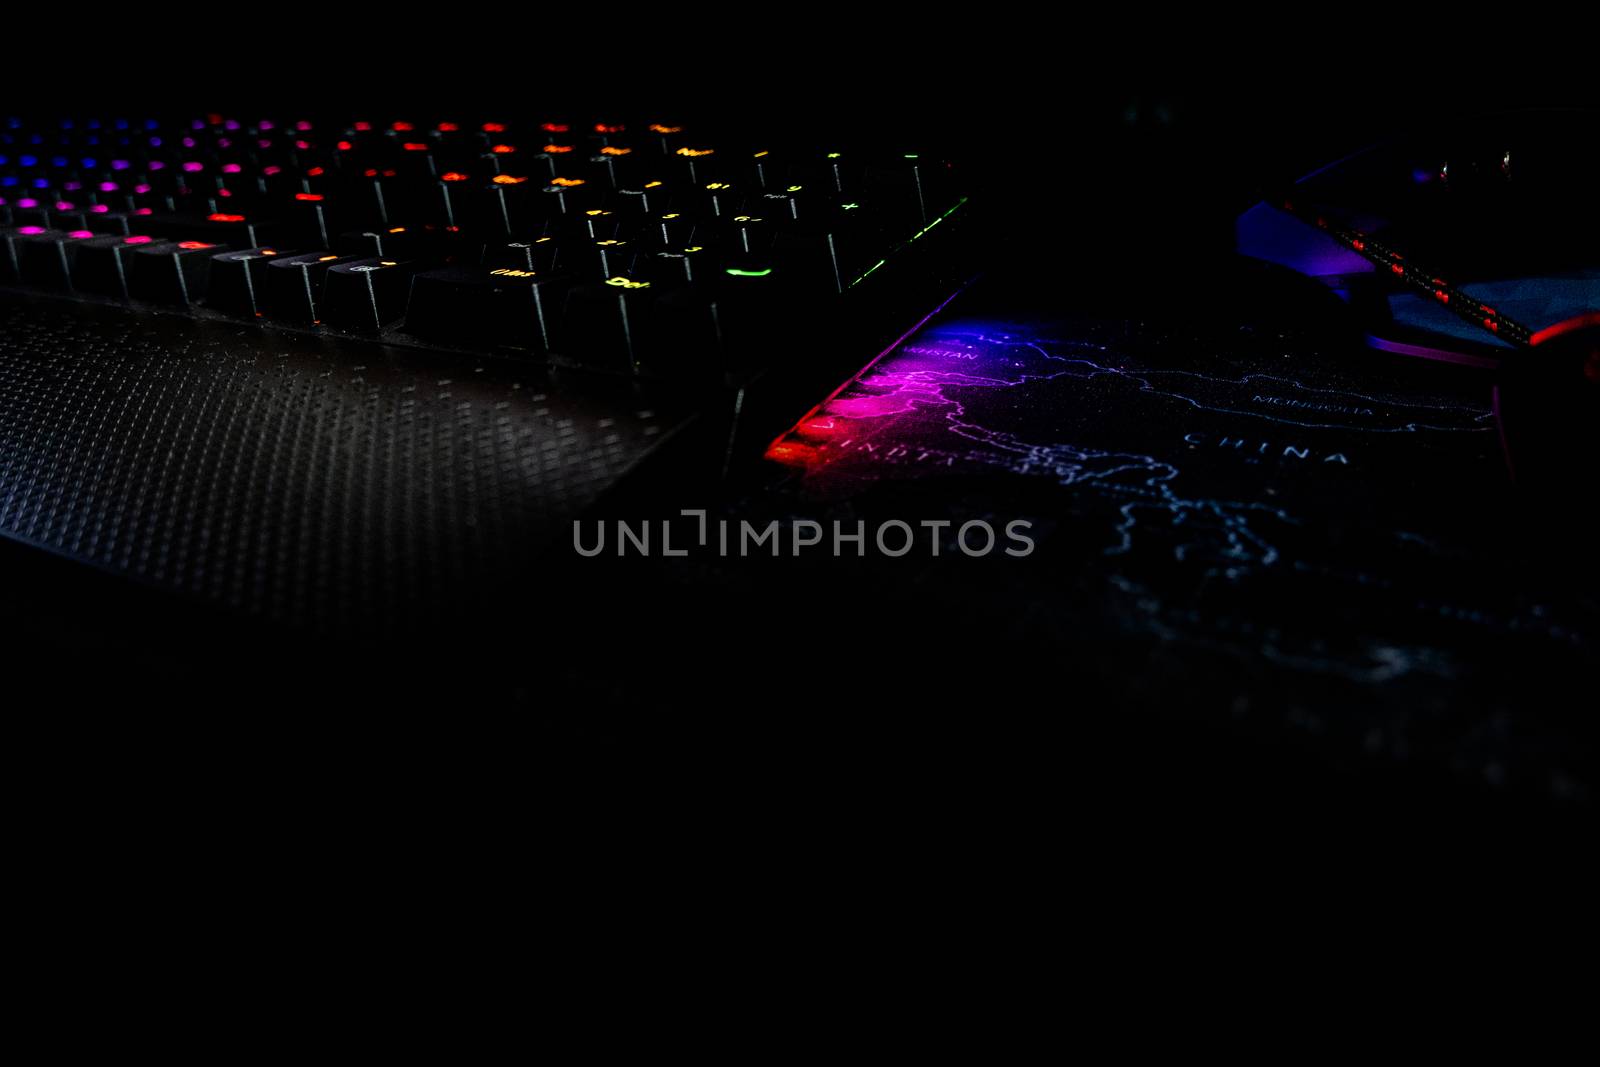 The Back lighted computer gaming keyboard with RGB gradient colors, black space for putting text